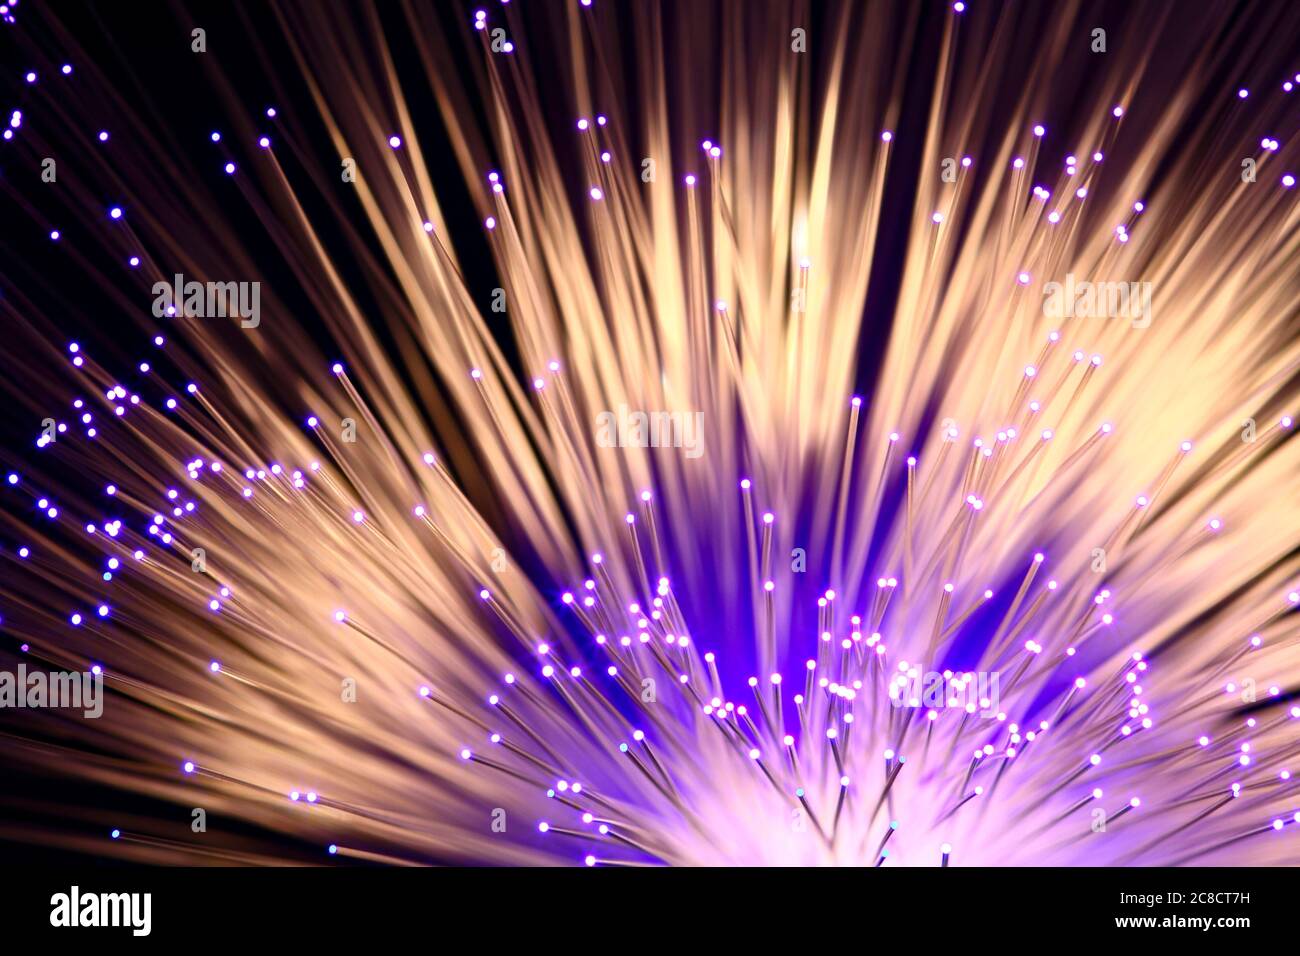 Fibre optic strands with light passing through creating a colourful abstract burst of light pattern Stock Photo